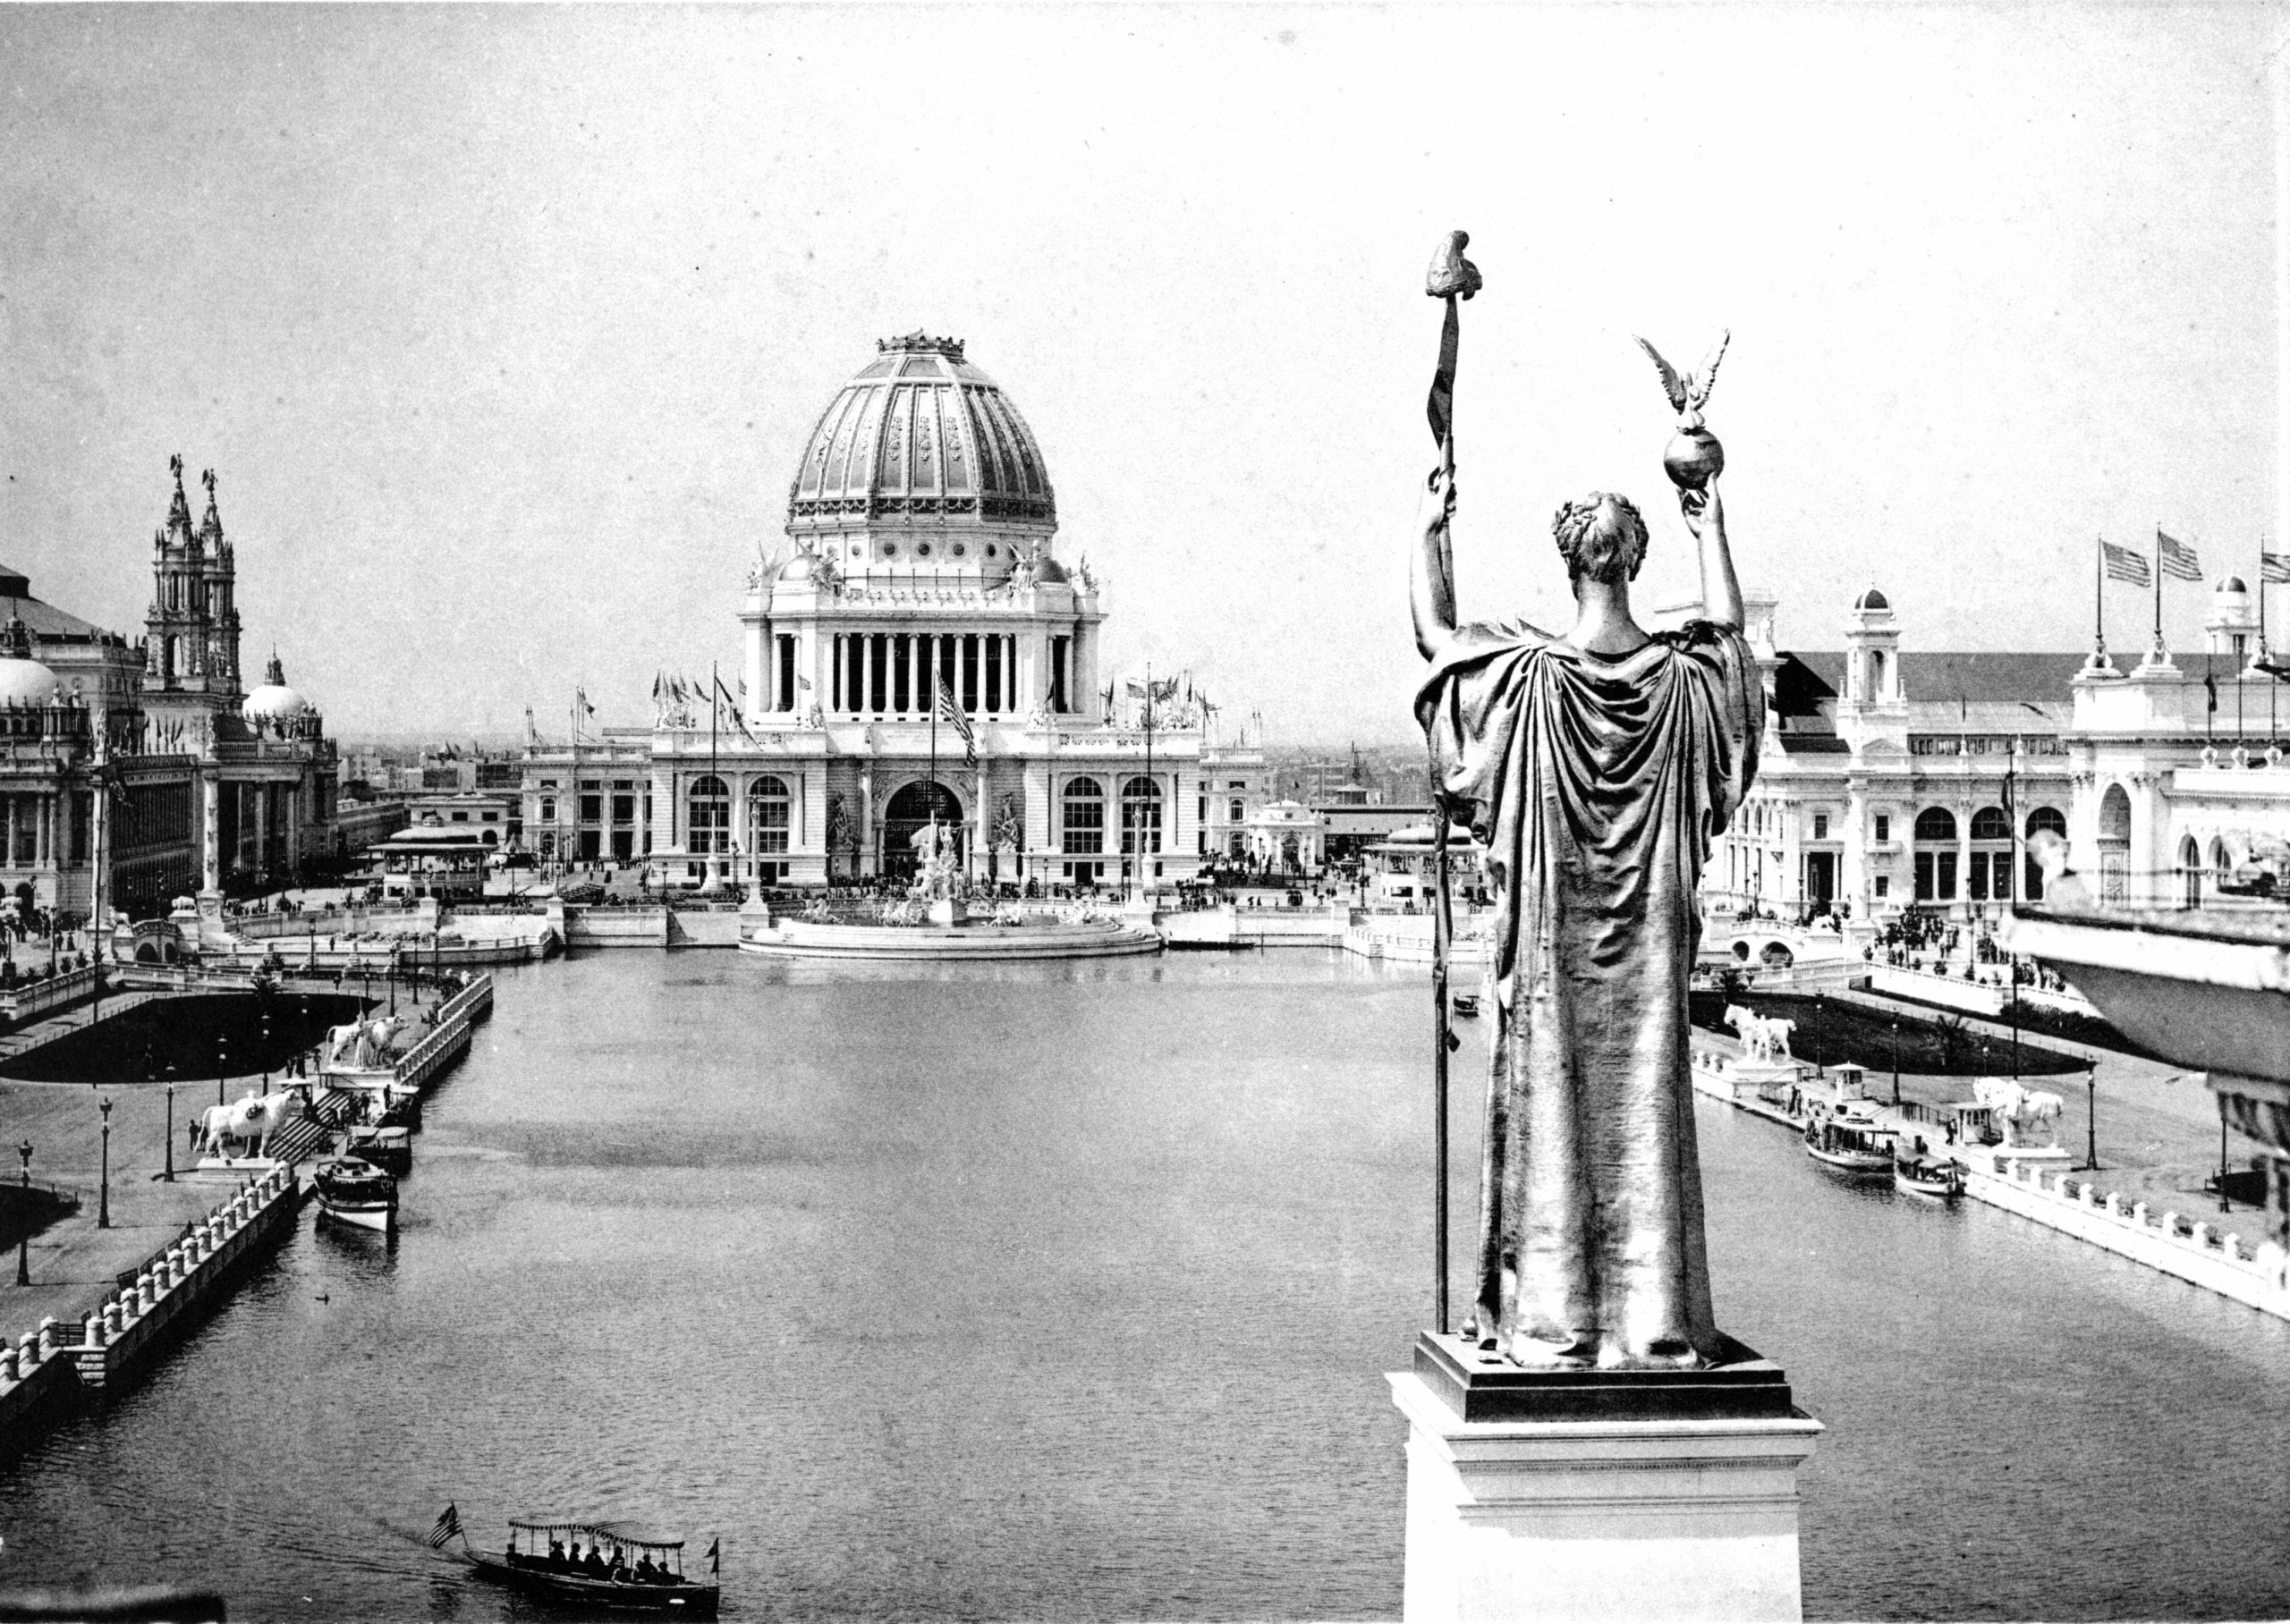 The World's Columbian Exposition: The White City and fairgrounds